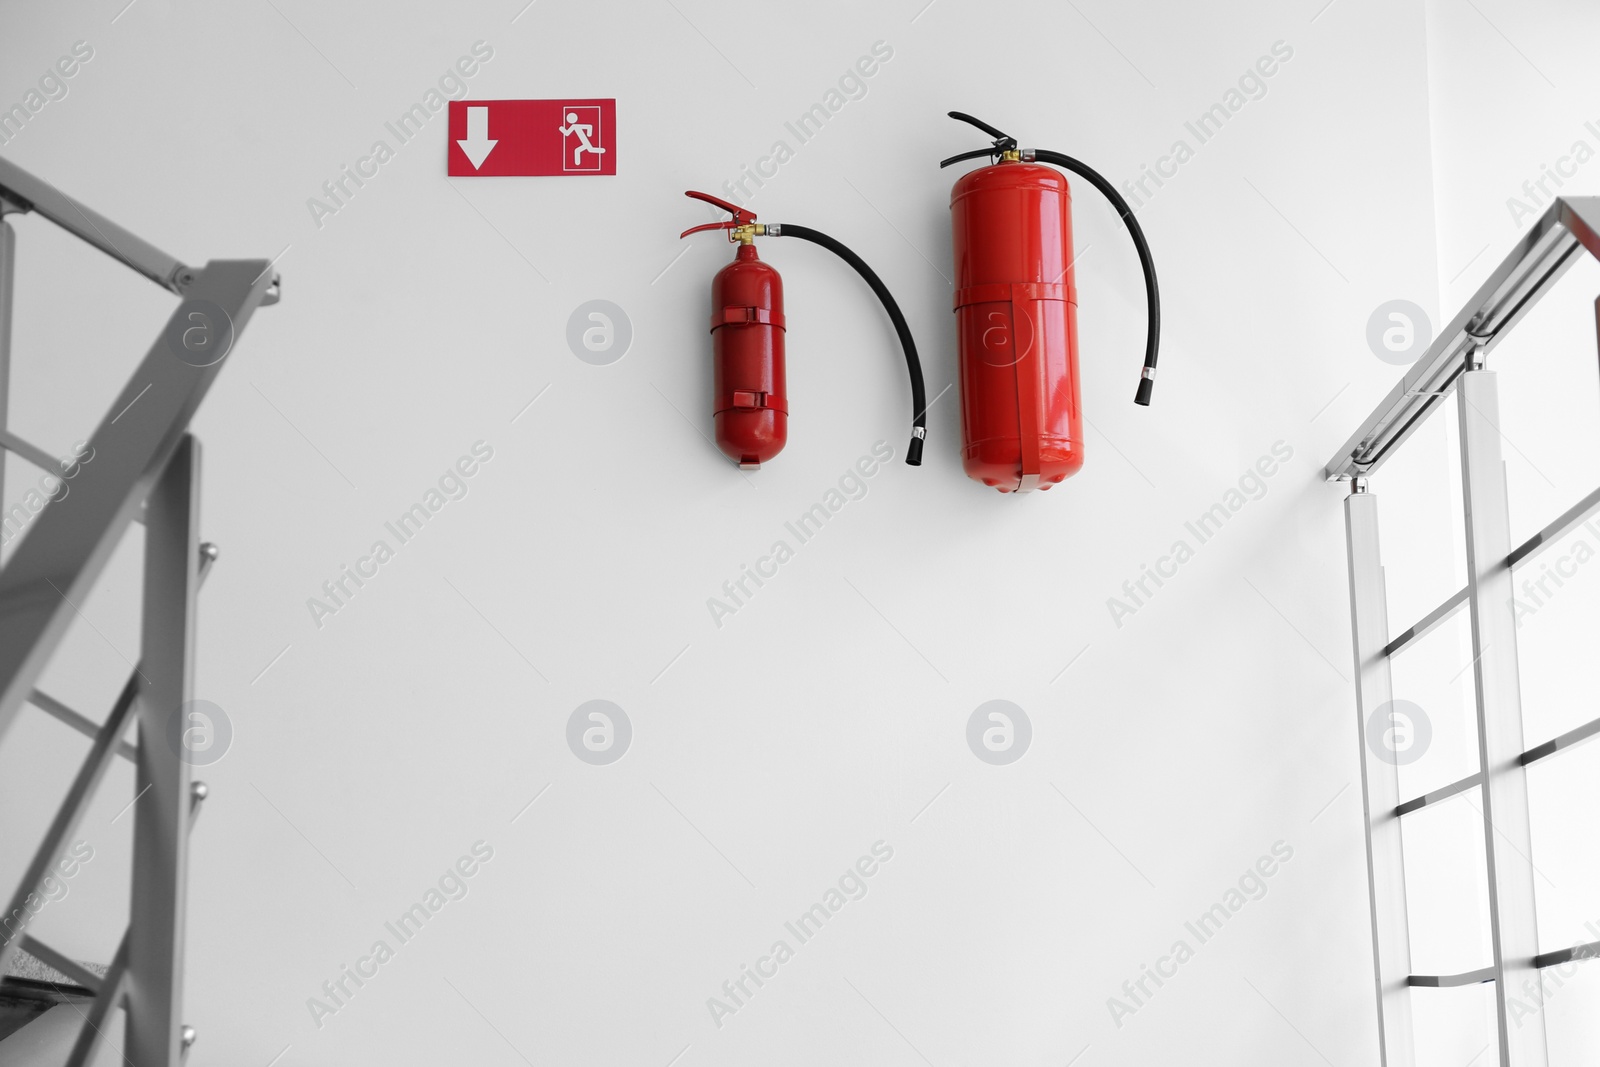 Photo of Fire extinguishers and emergency exit sign on white wall near staircase indoors